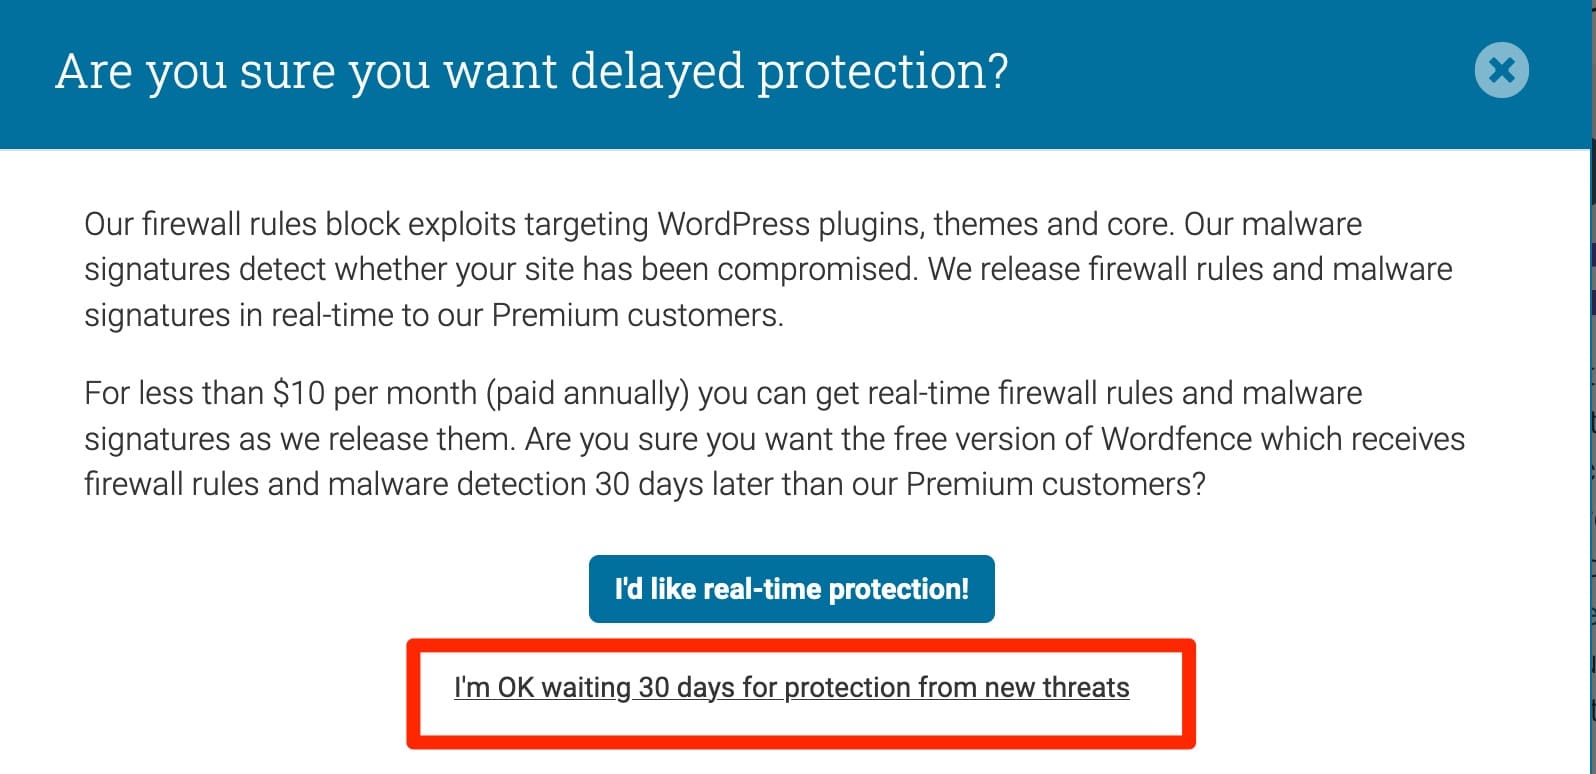 Delayed protection with the Wordfence free license.